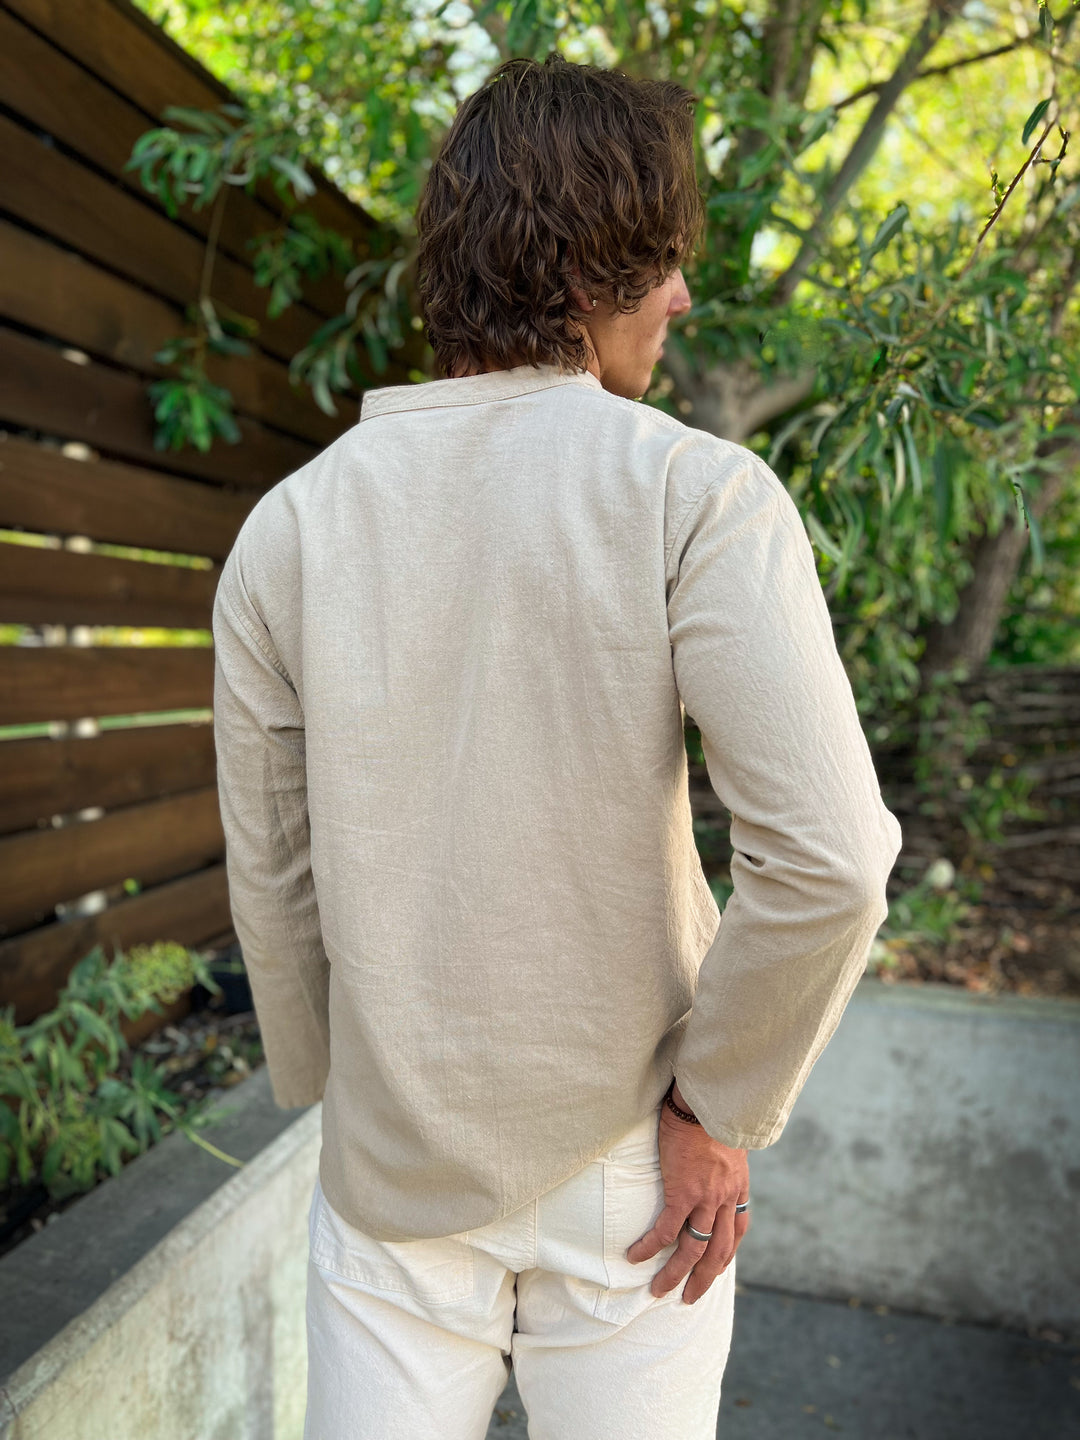 Model shows back of long-sleeve shirt and pants.